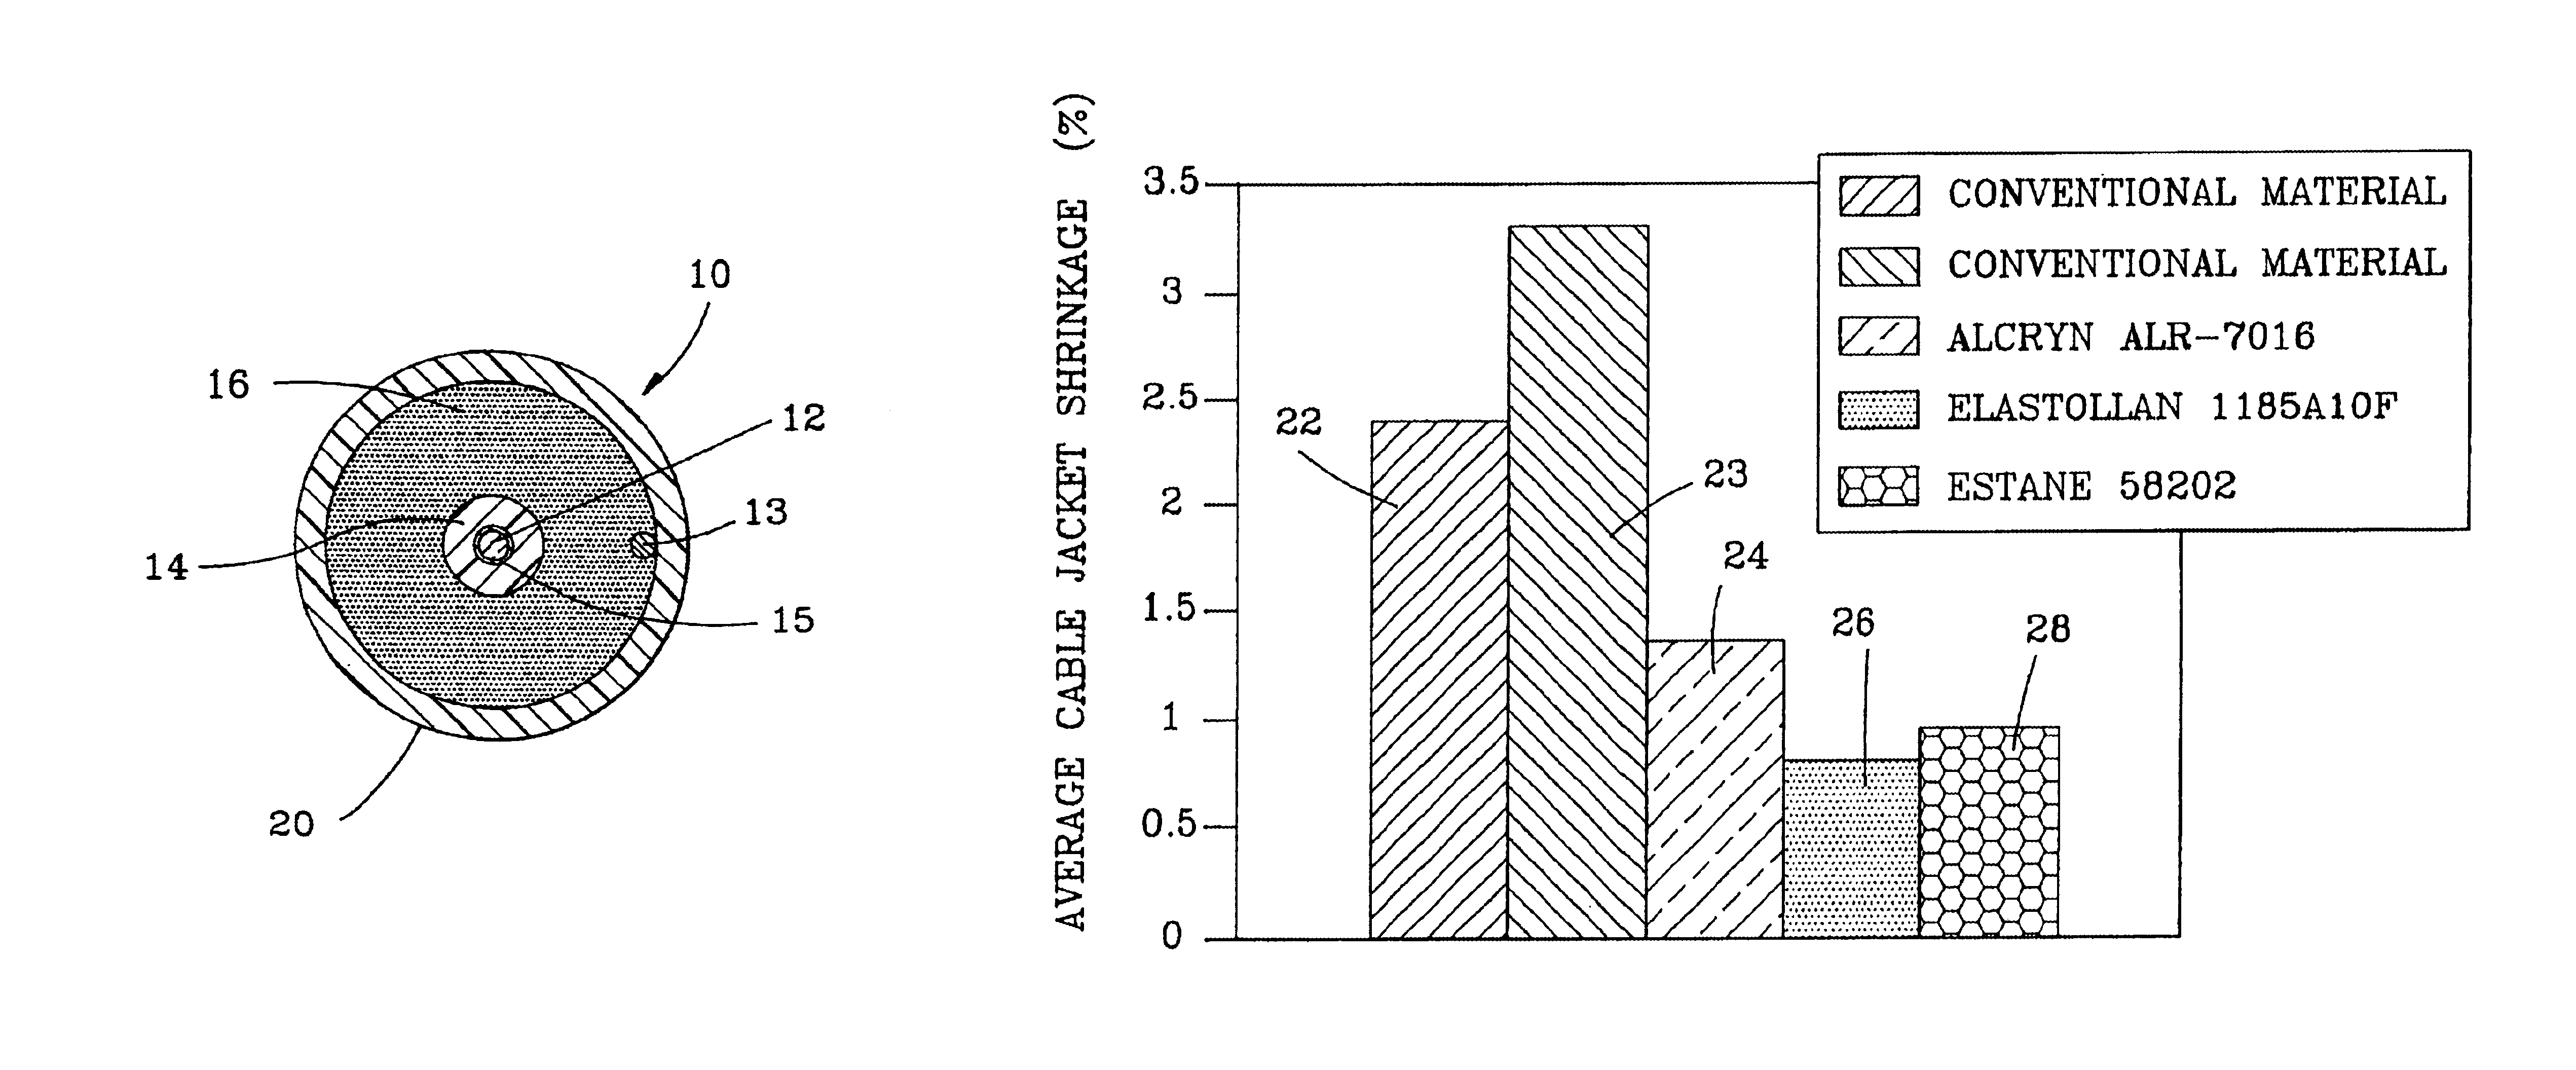 Fiber optic cable having a low-shrink cable jacket and methods of manufacturing the same